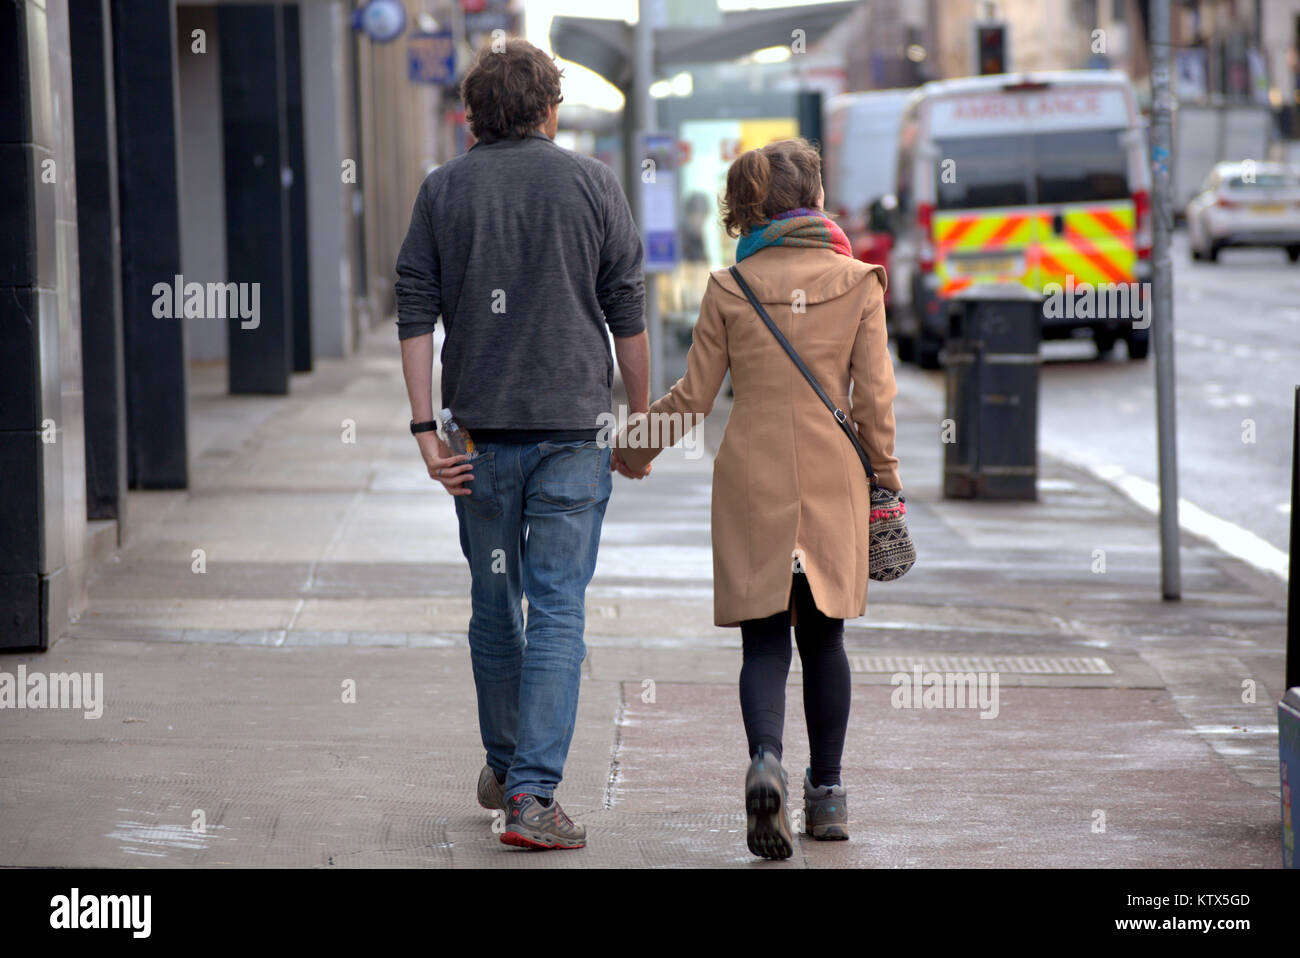 gritty urban Sauchiehall Street, Glasgow street life young couple a boy and a girl holding hands walking on a date on the sidewalk viewed from behind Stock Photo